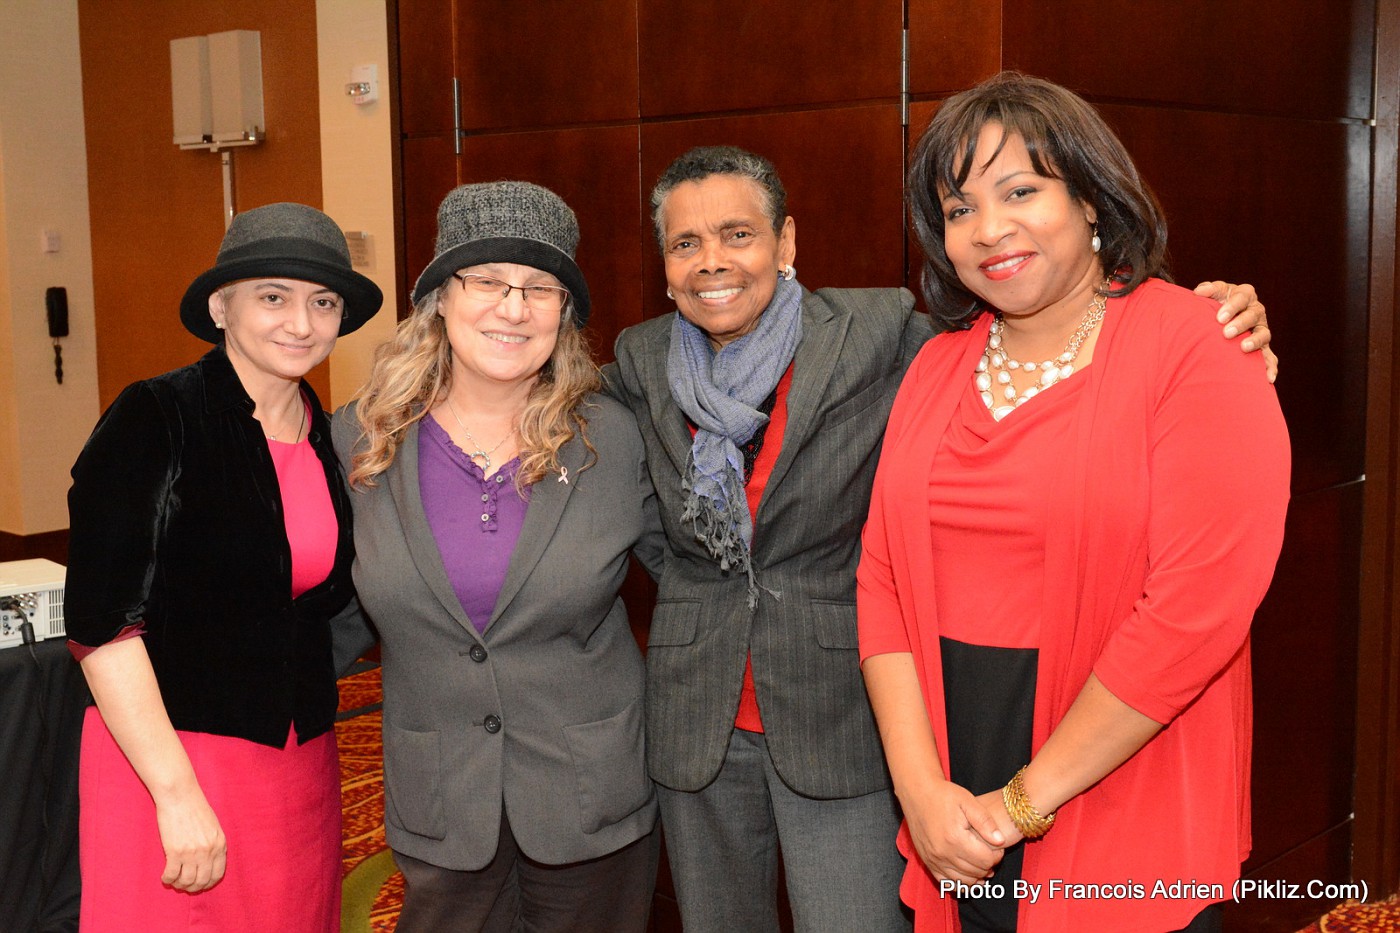 Karl Racine Attorney General Reception In Dc Election Night At The